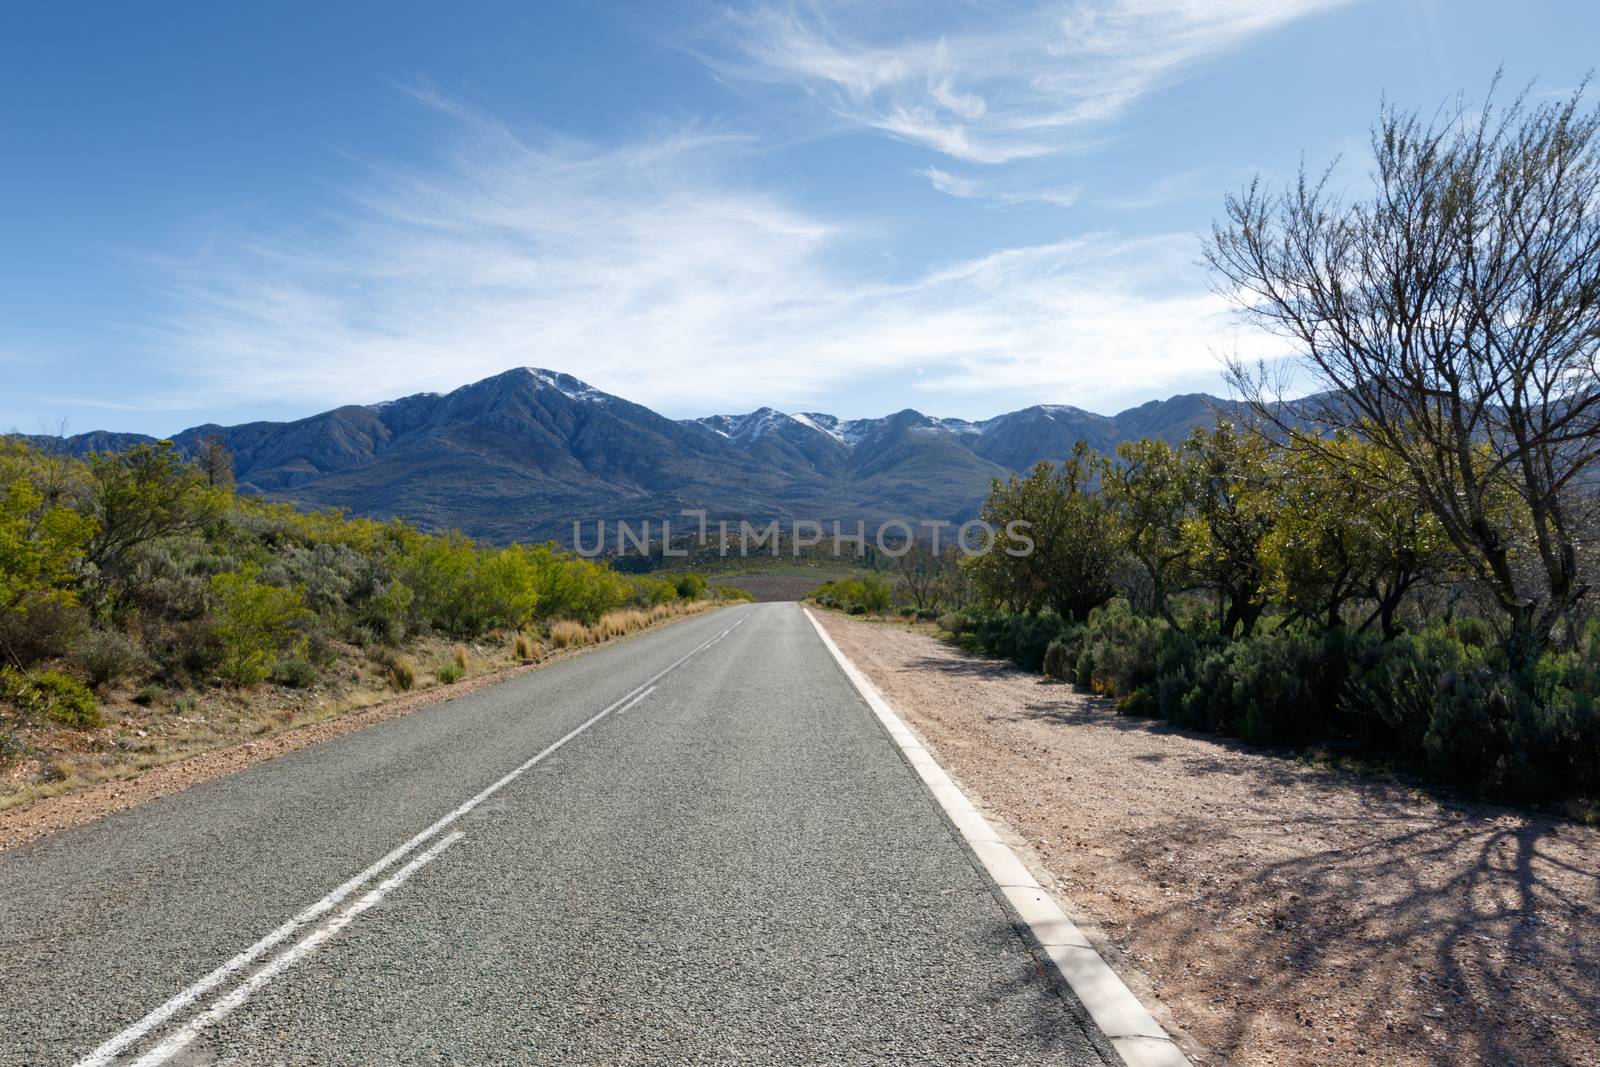 Snow - The Swartberg mountains are a mountain range in the Western Cape province of South Africa. It is composed of two main mountain chains running roughly east-west along the northern edge of the semi-arid Little Karoo.